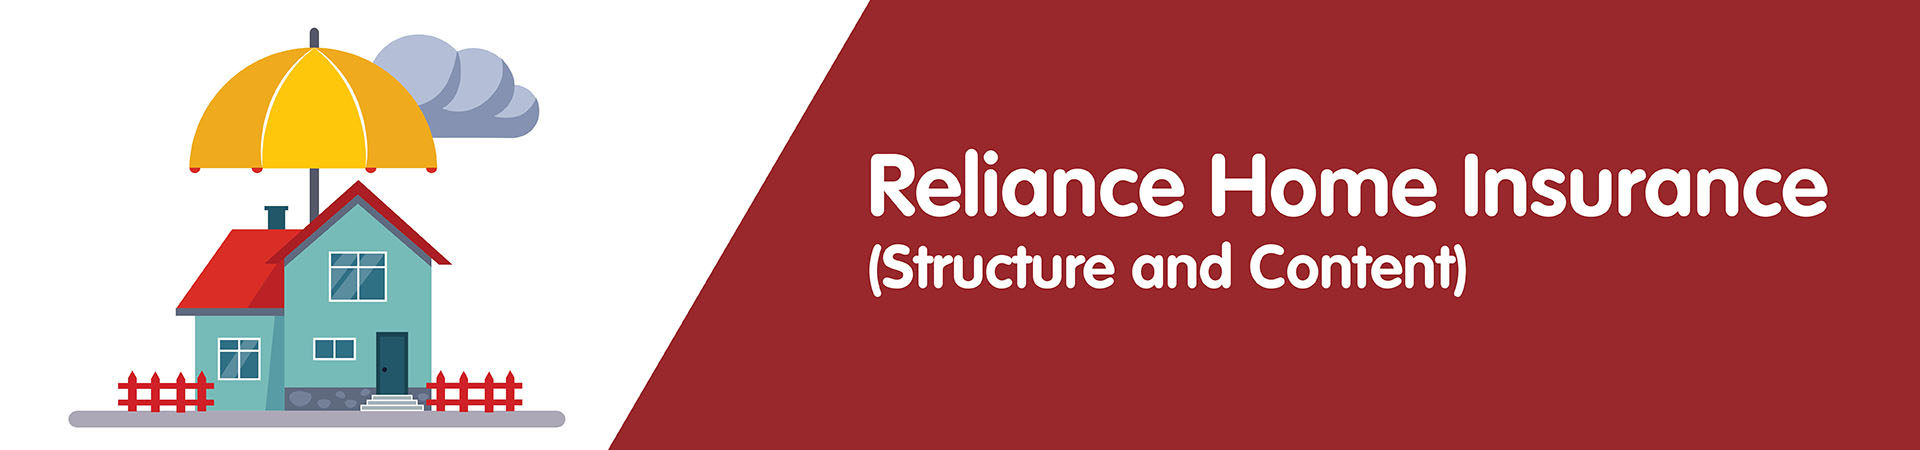 Reliance Home structure and Content Insurance